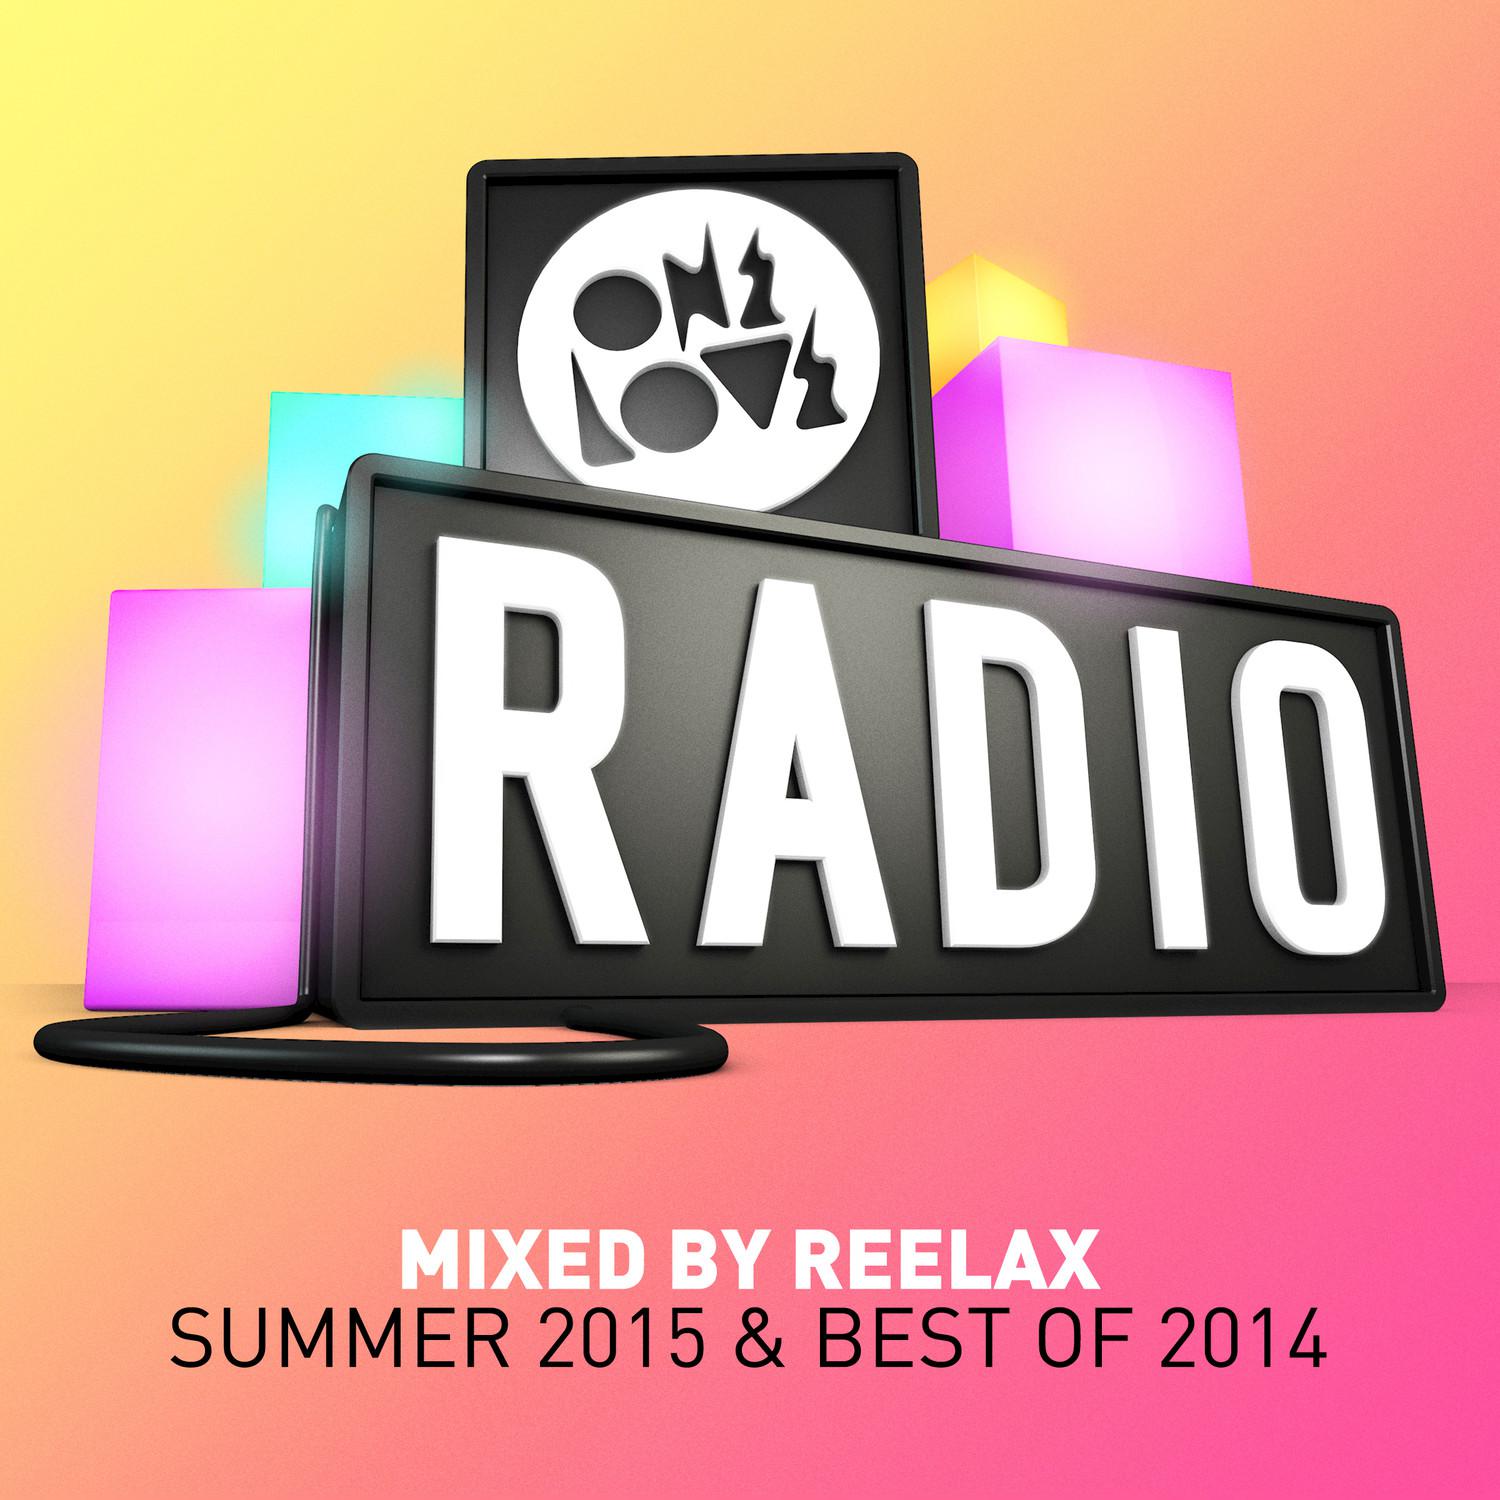 Onelove Radio Summer 2015 & Best of 2014 (Mixed by Reelax)